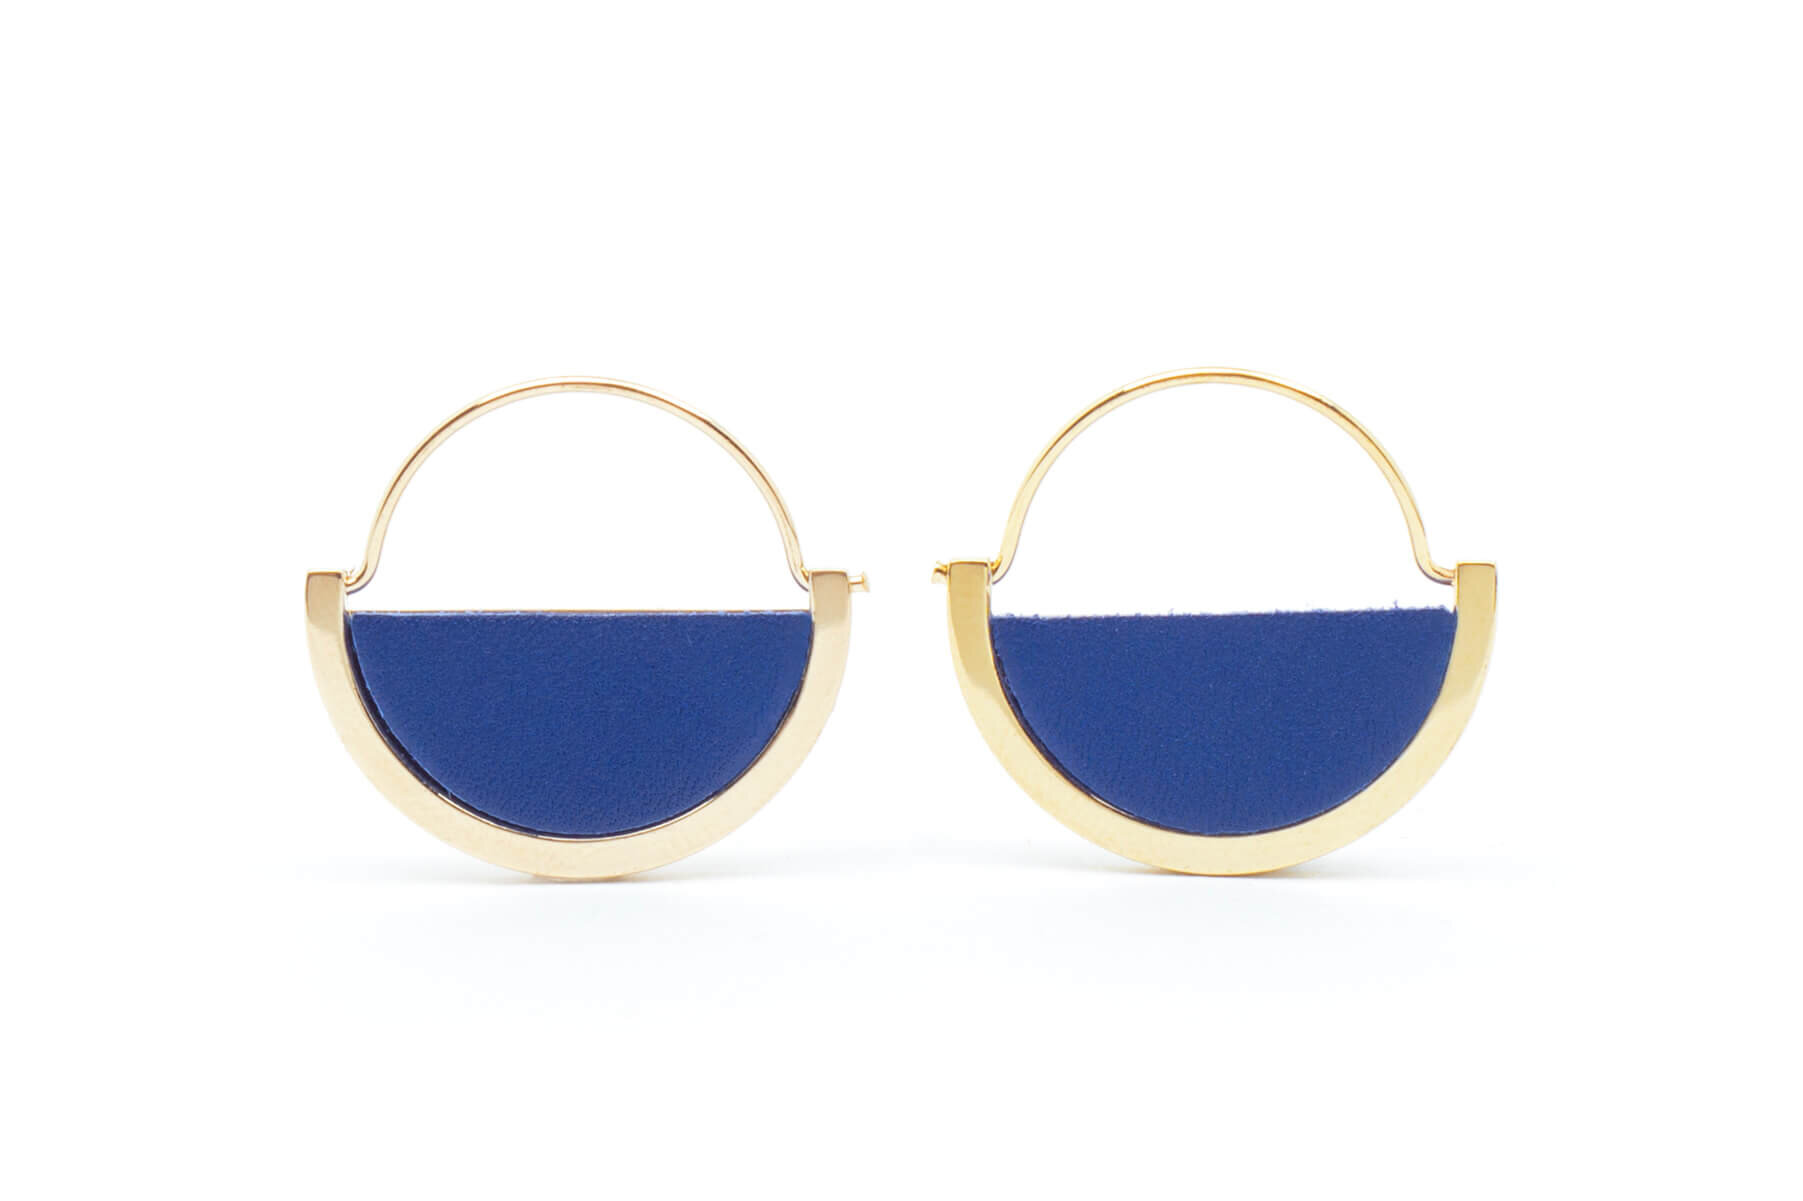 Earrings - Collection Demi-Lune in blue leather and golden brass Size M - Pascaline Viraben